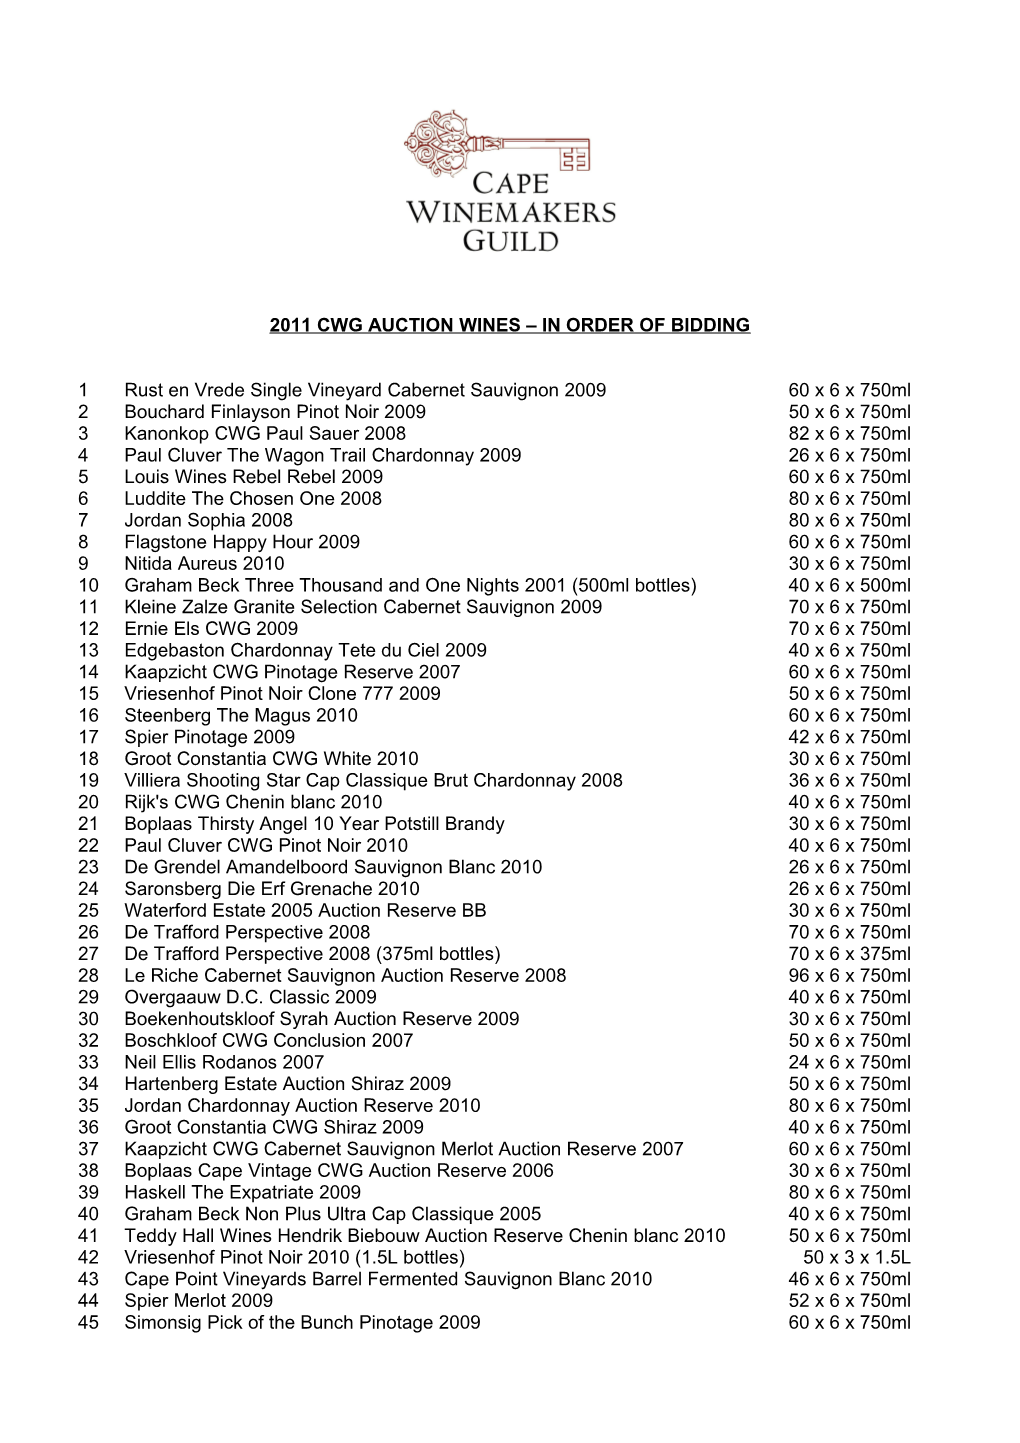 2011 Cwg Auction Wines in Order of Bidding